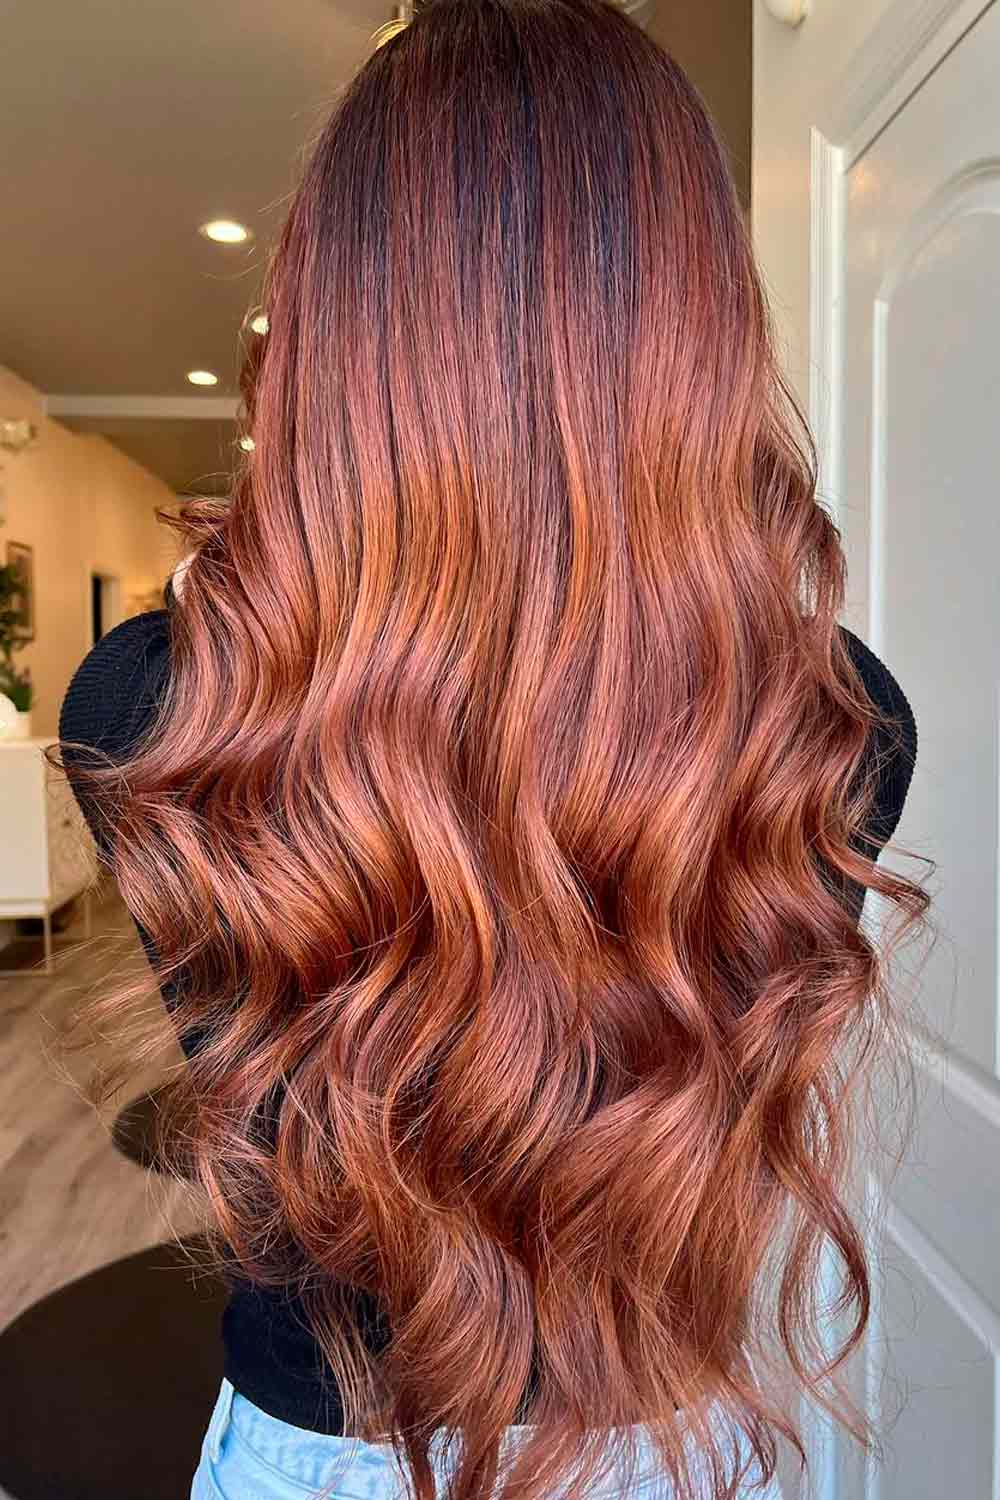 How To Find Your Perfect Auburn Color Shade?